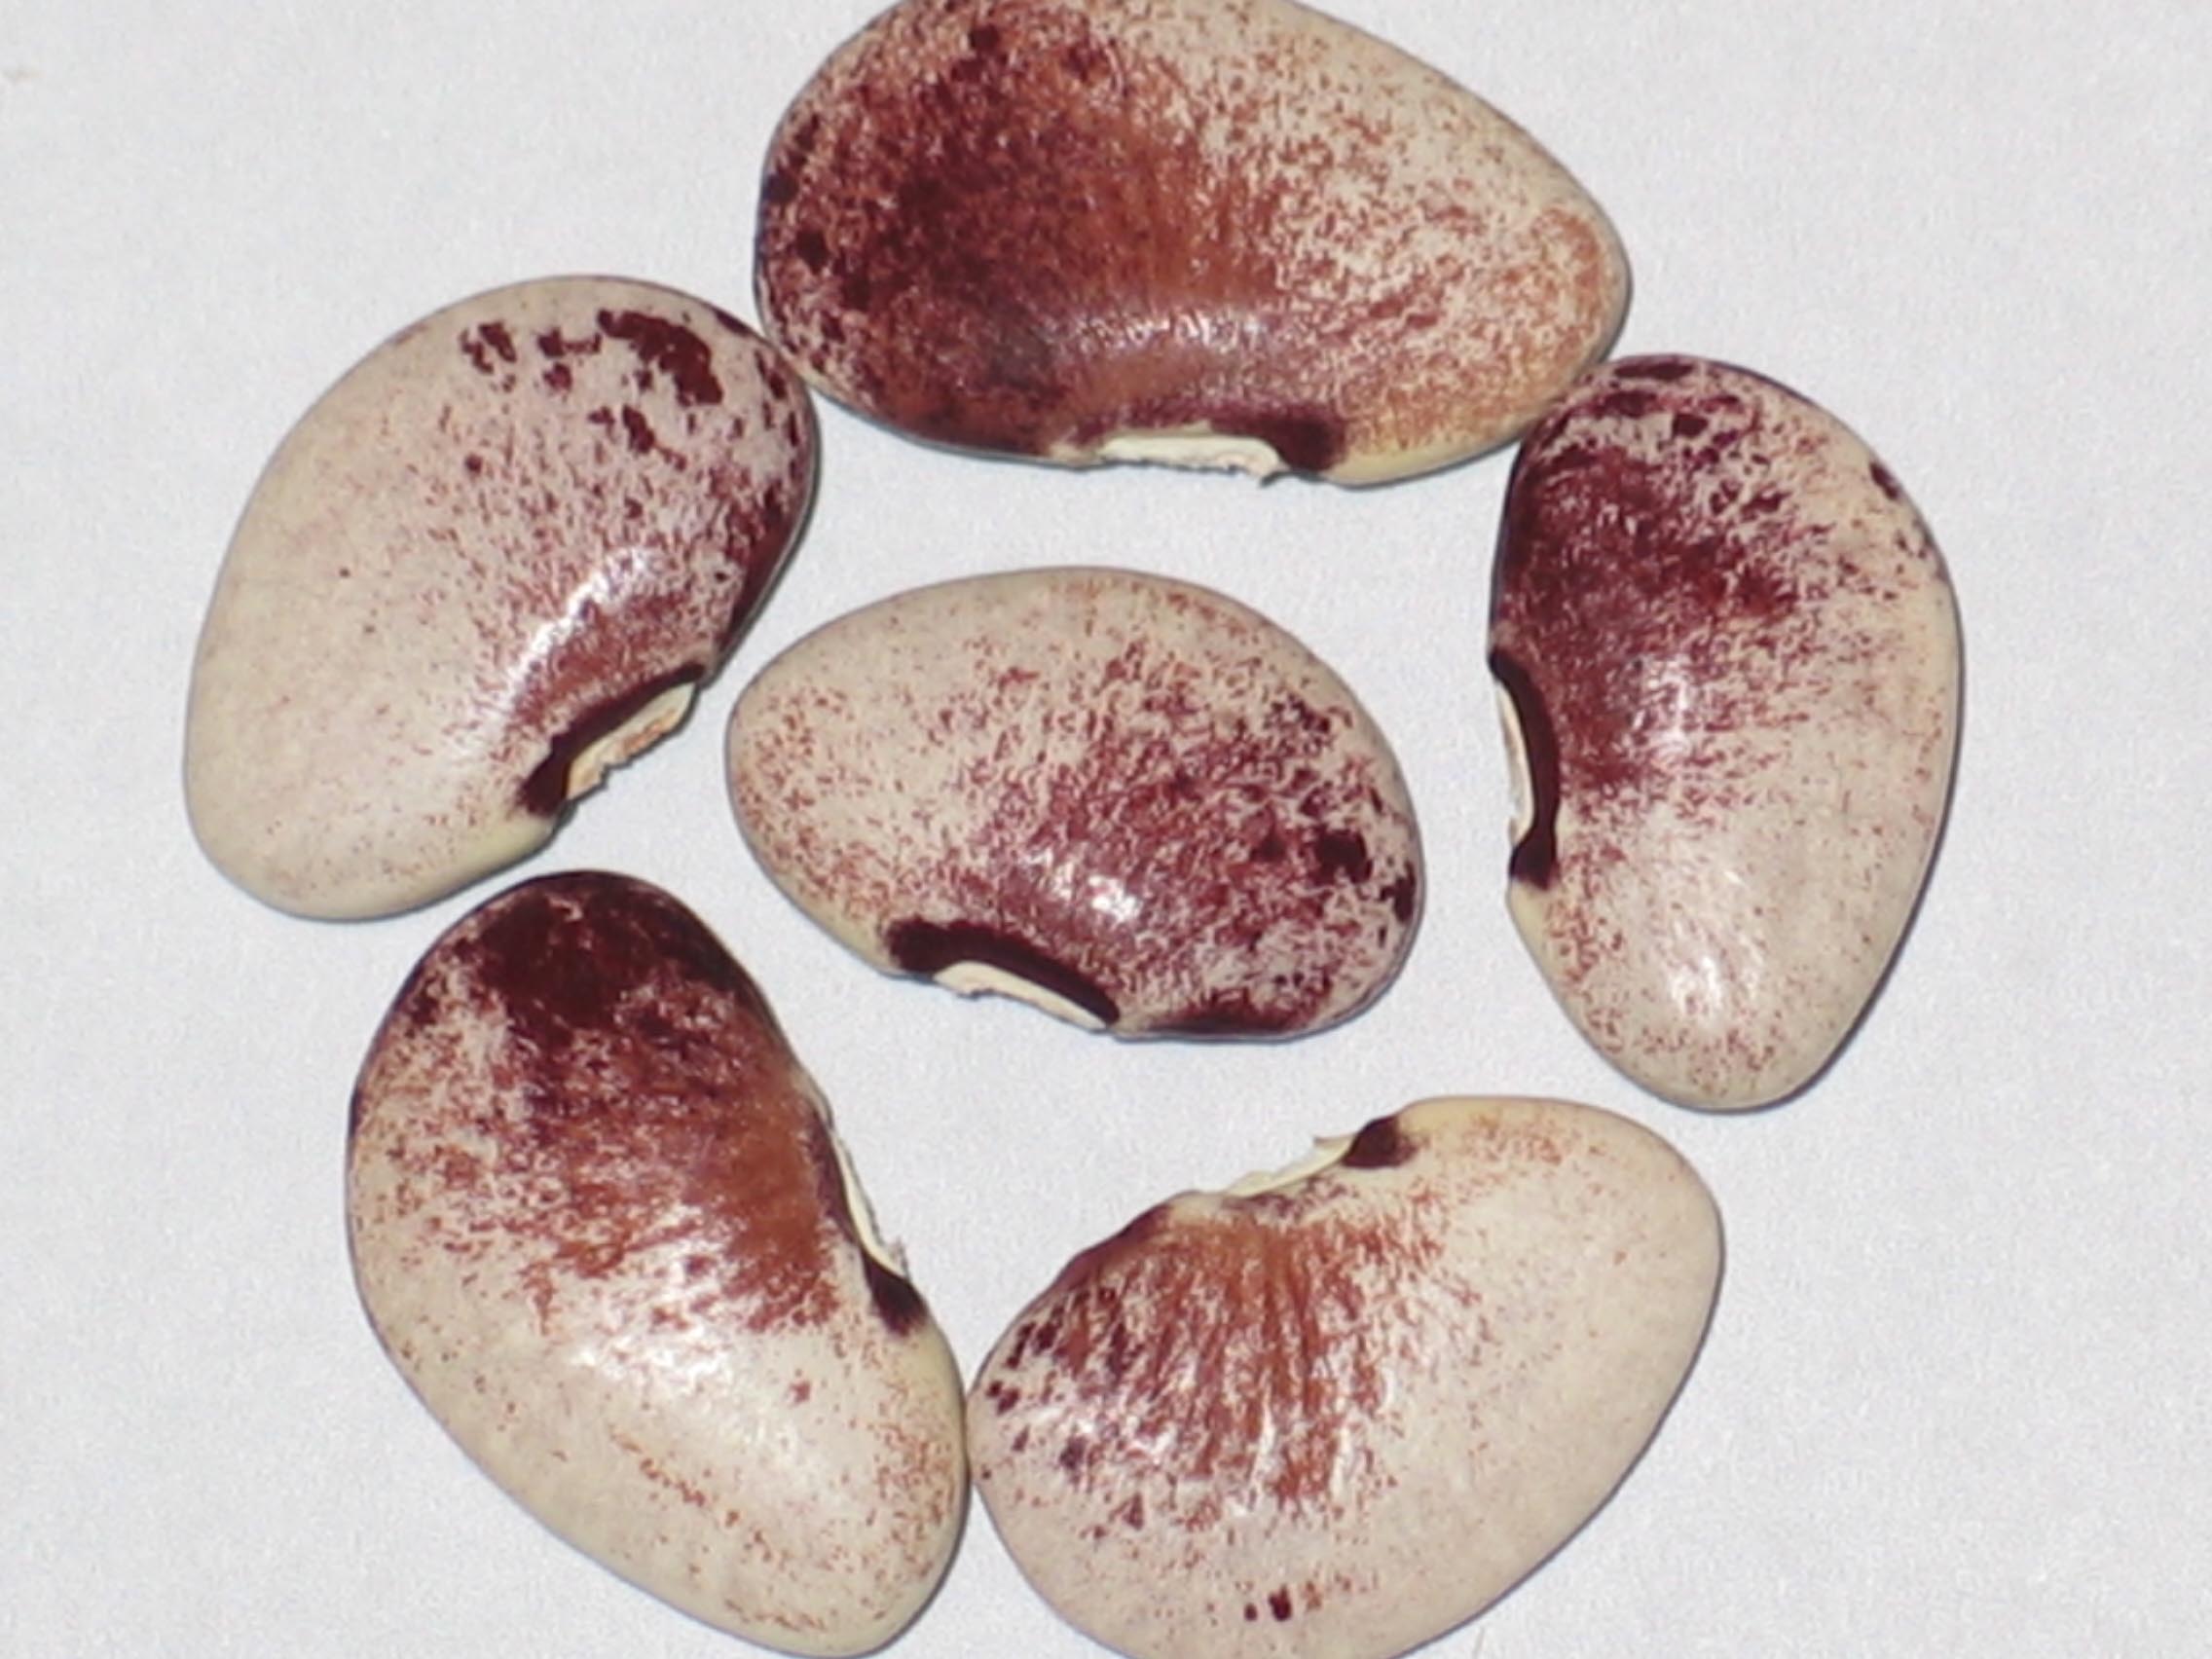 image of North Star beans